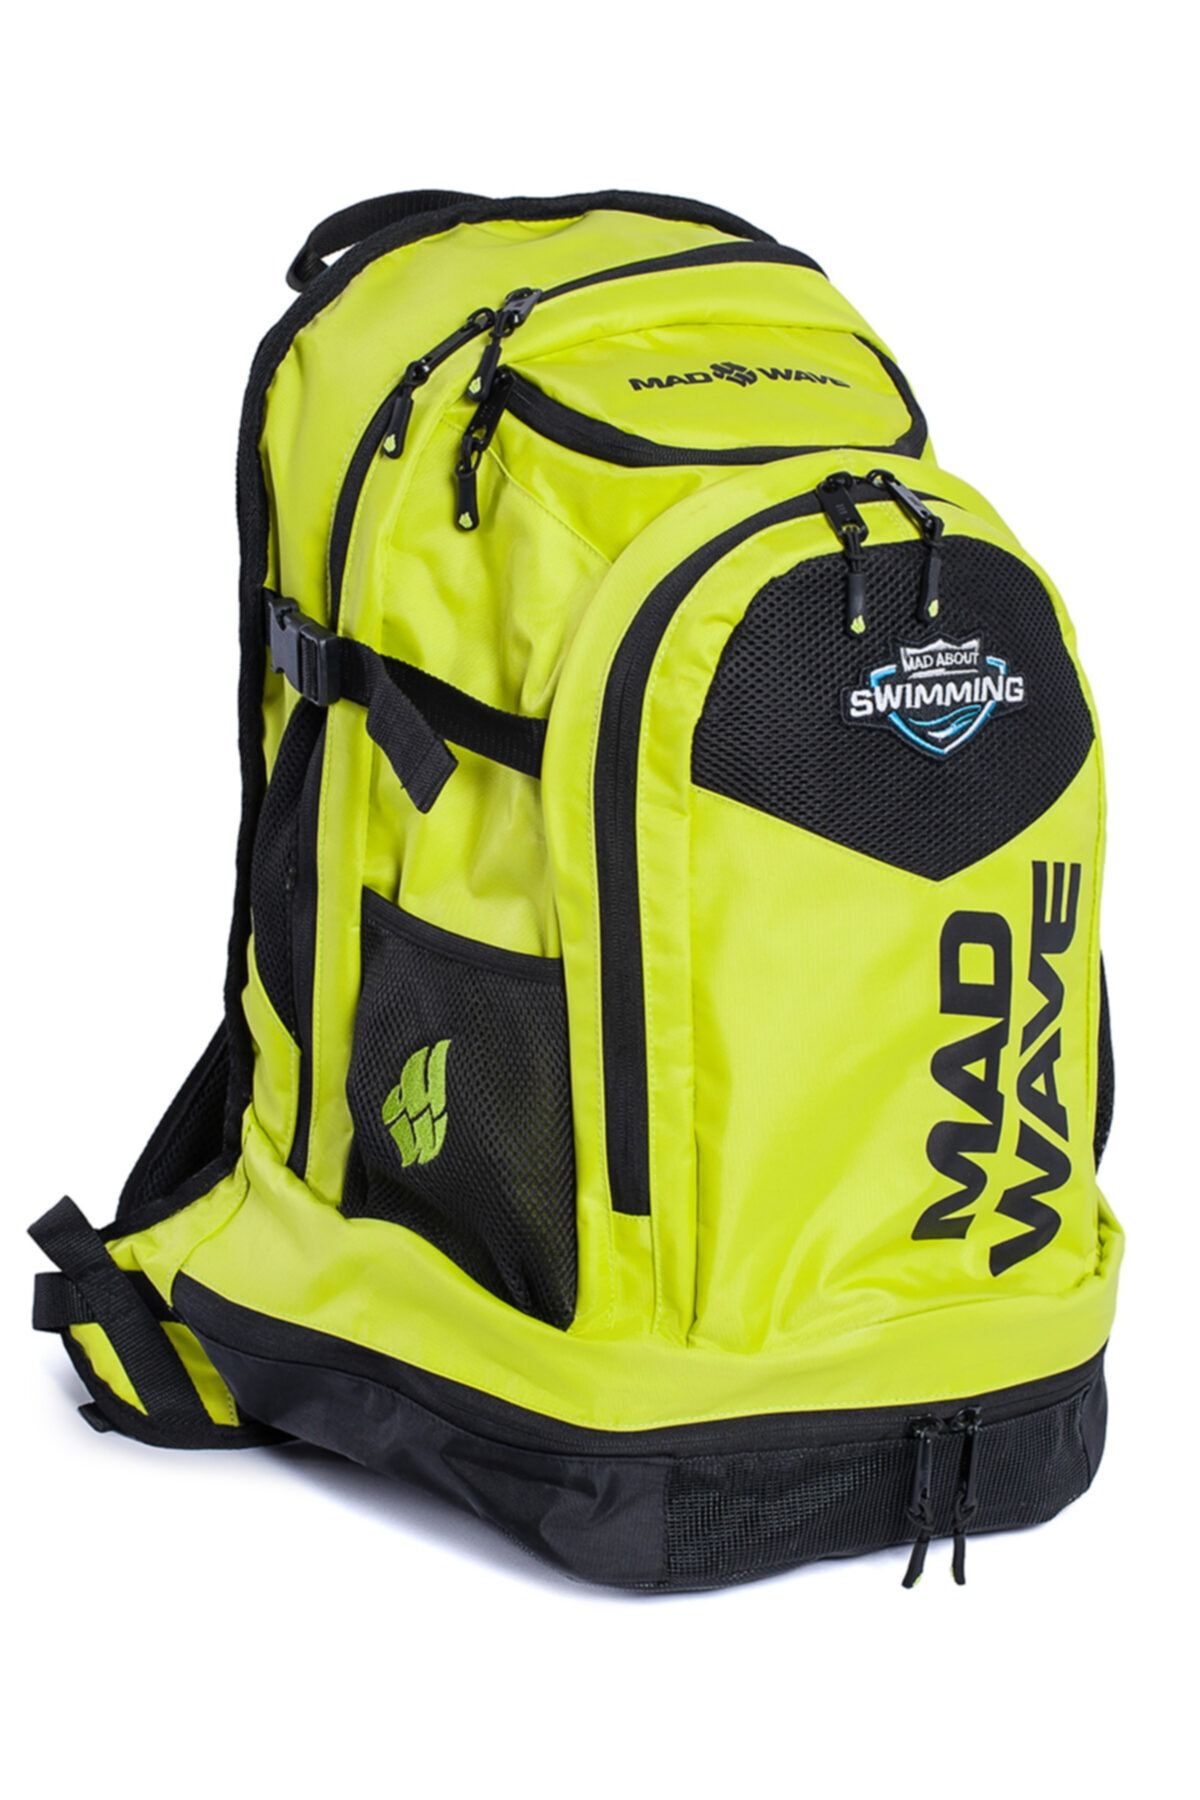 Mad Wave M1126 04 0 10w Backpack Lane, 54x32x24 Green